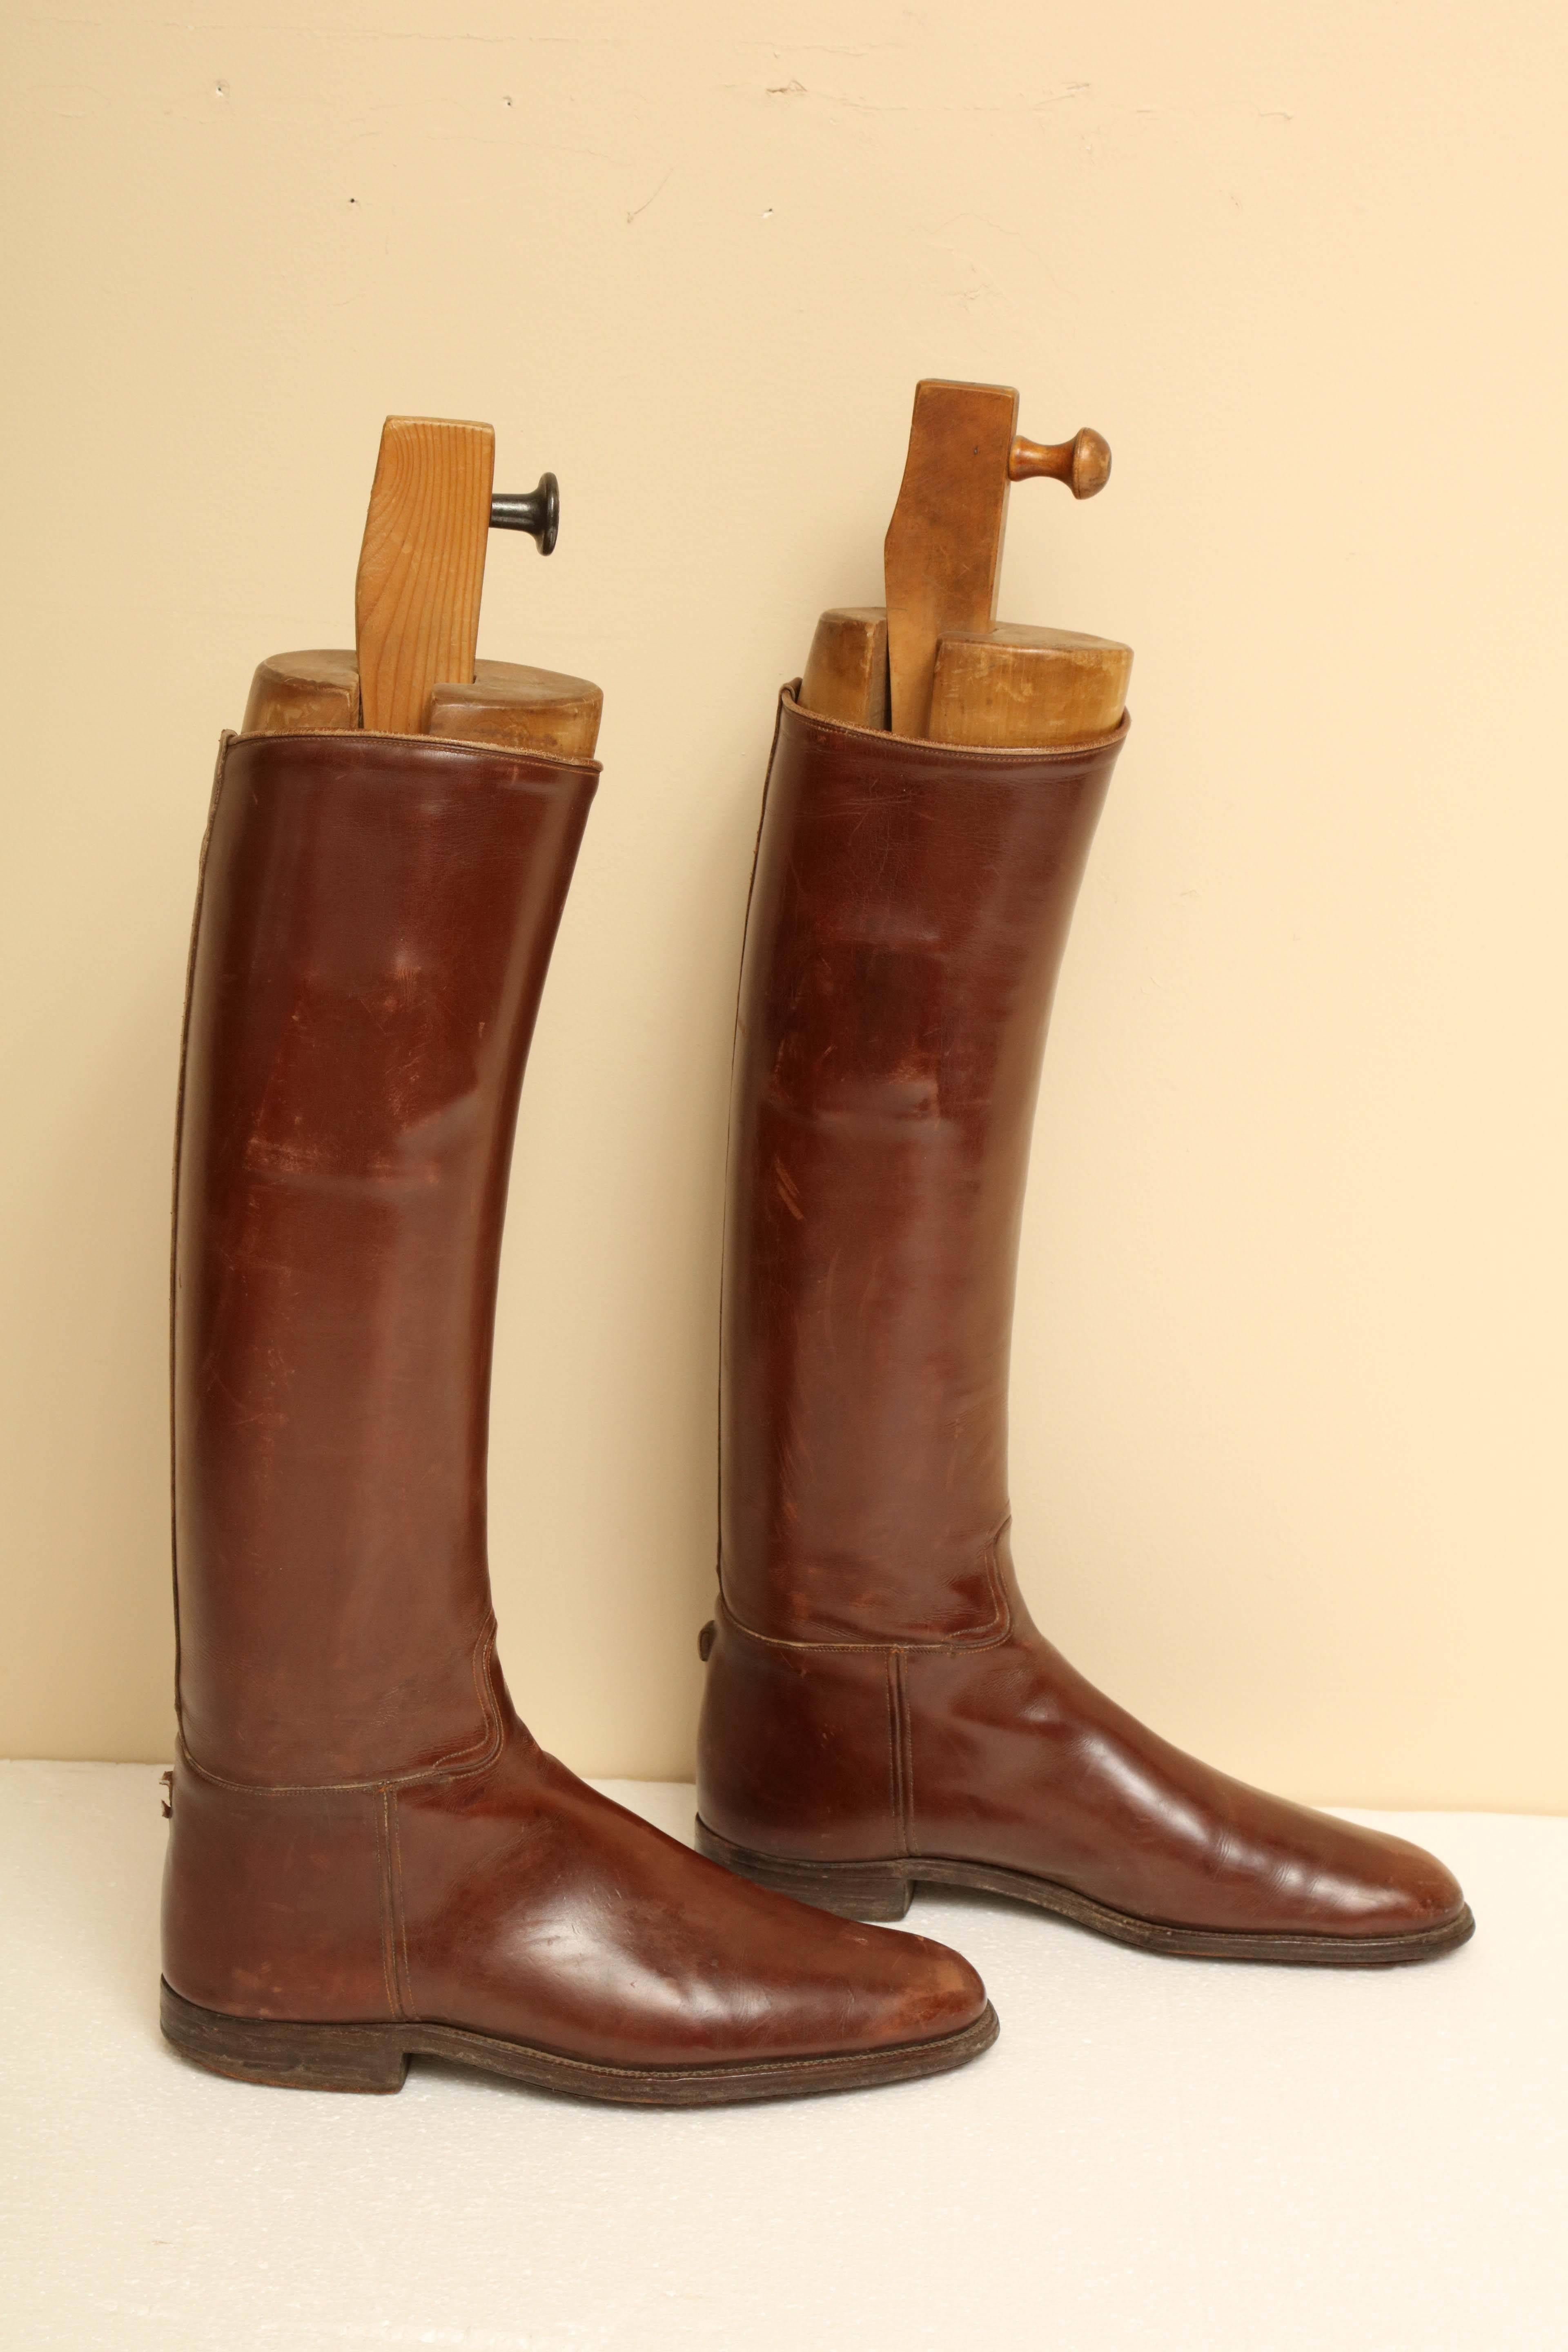 Leather Pair of English Riding Boots with Custom Boot Trees